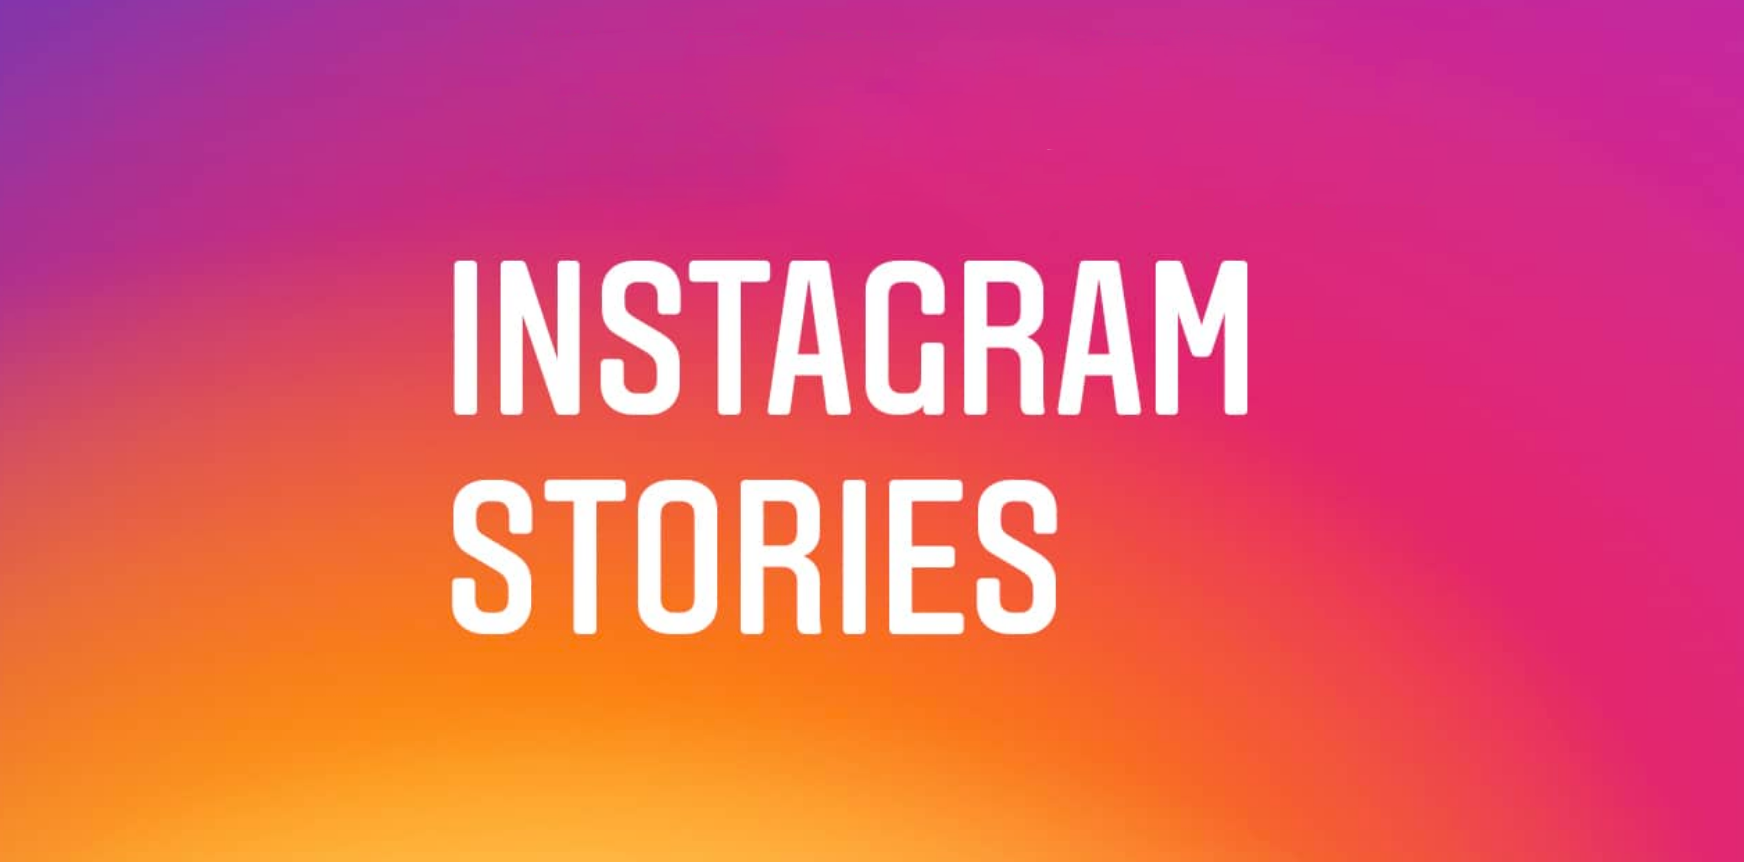 Promotional image showing the words Instagram Stories in white, capitalized, on top of a colorful background 